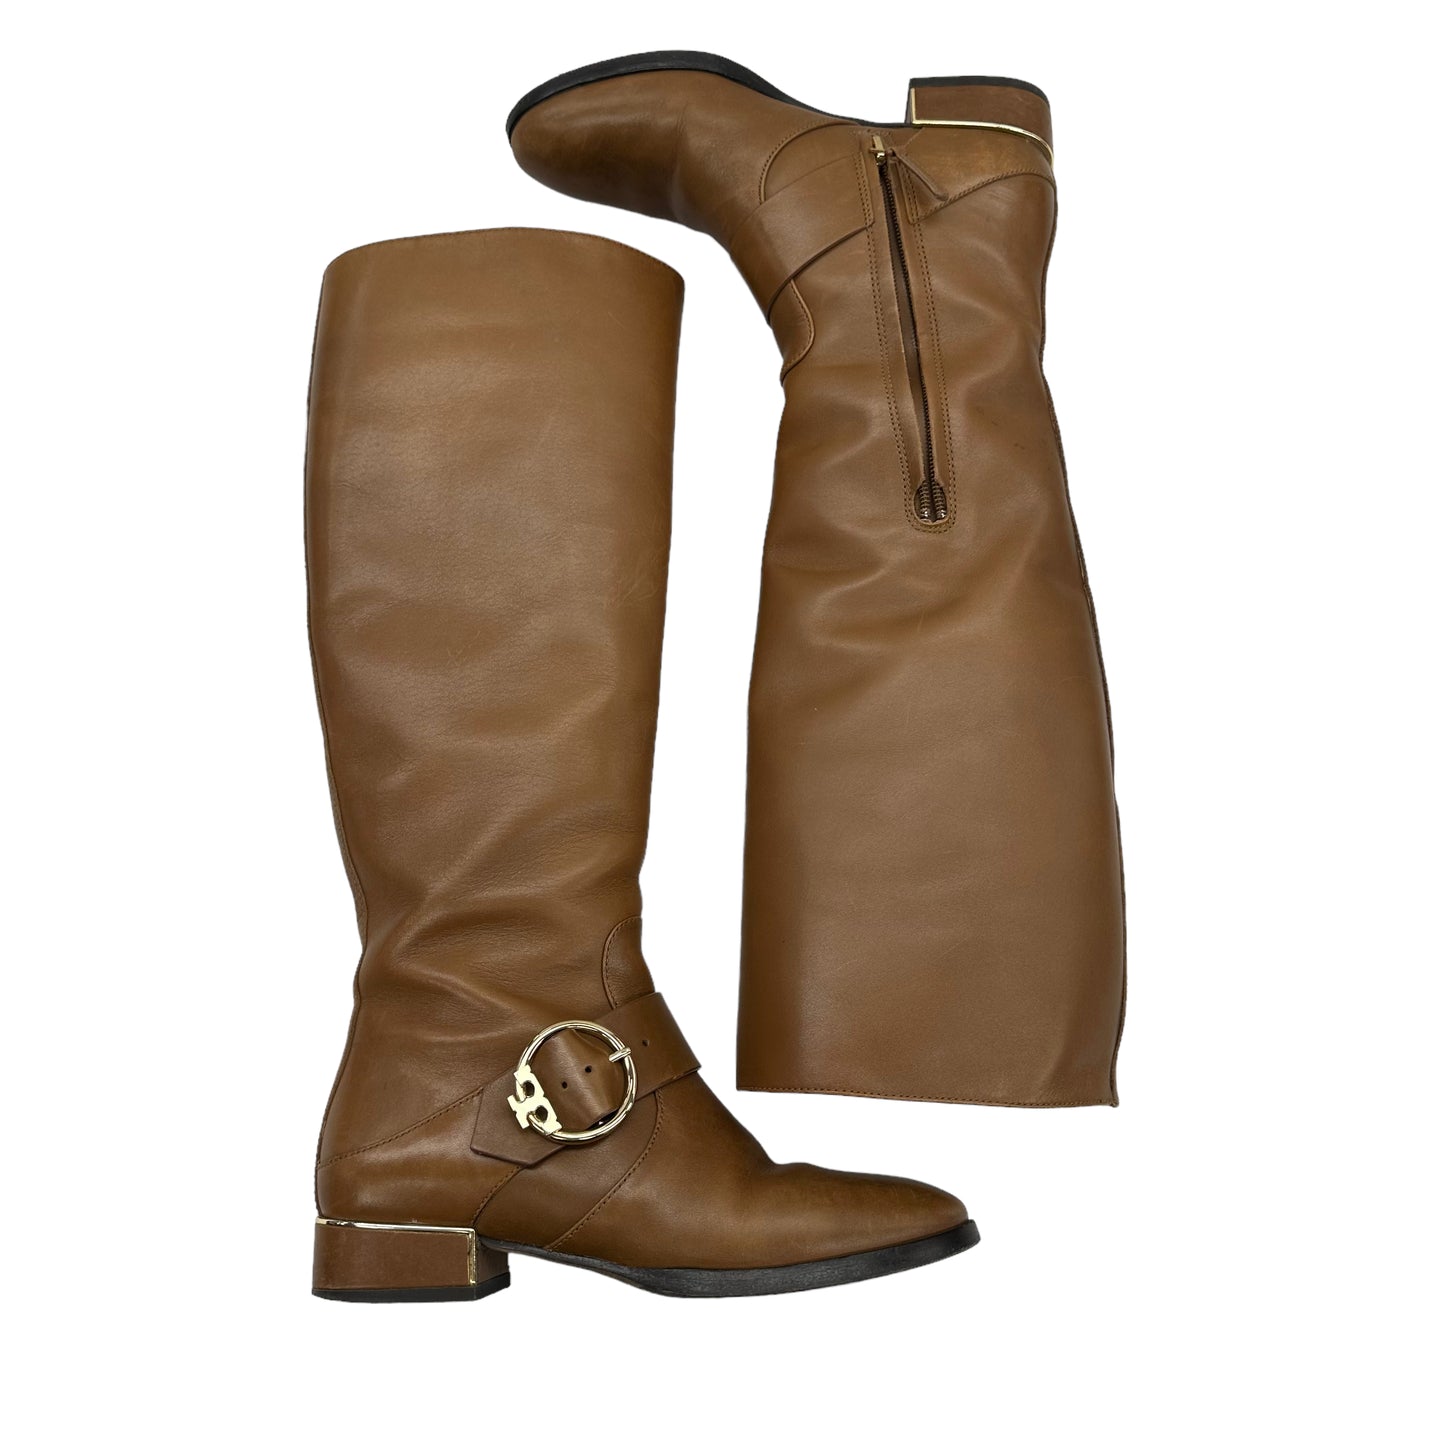 Boots Designer By Tory Burch  Size: 5.5